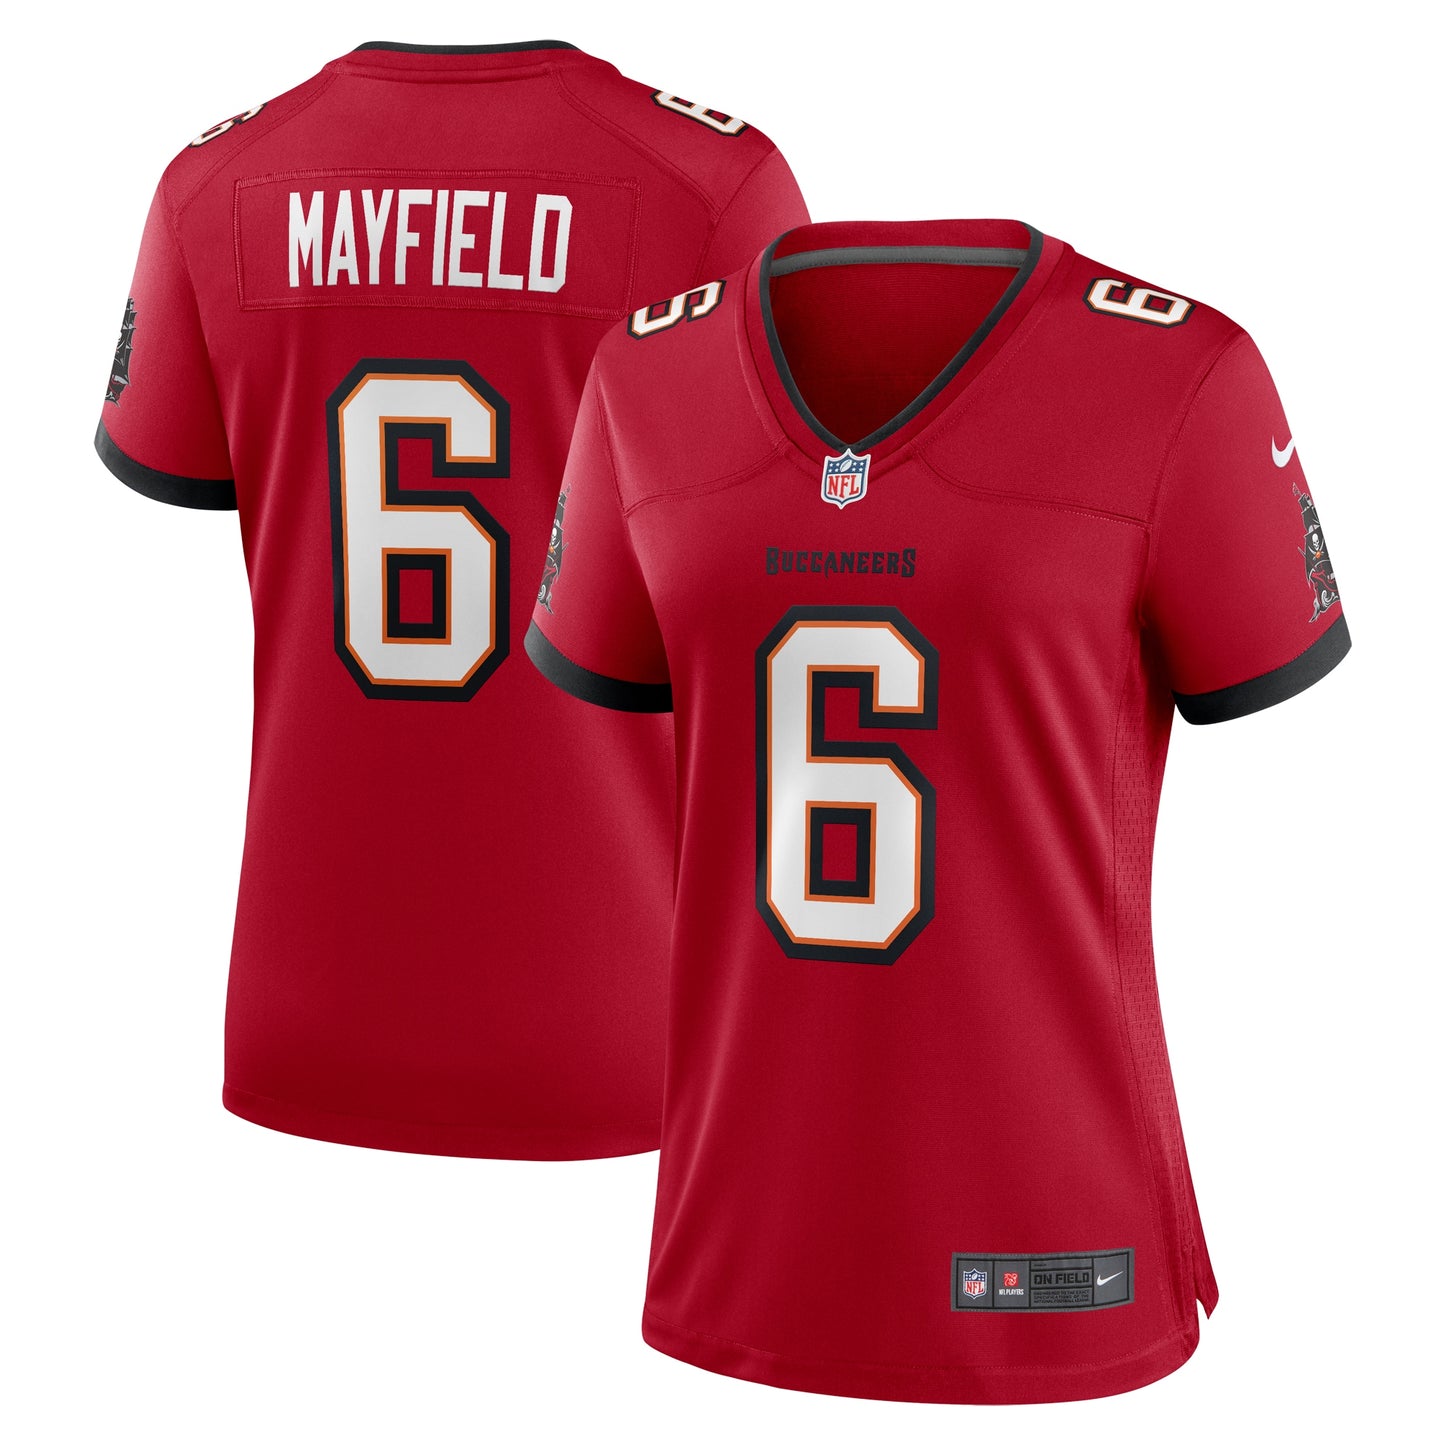 Baker Mayfield Tampa Bay Buccaneers Nike Women's Game Jersey - Red